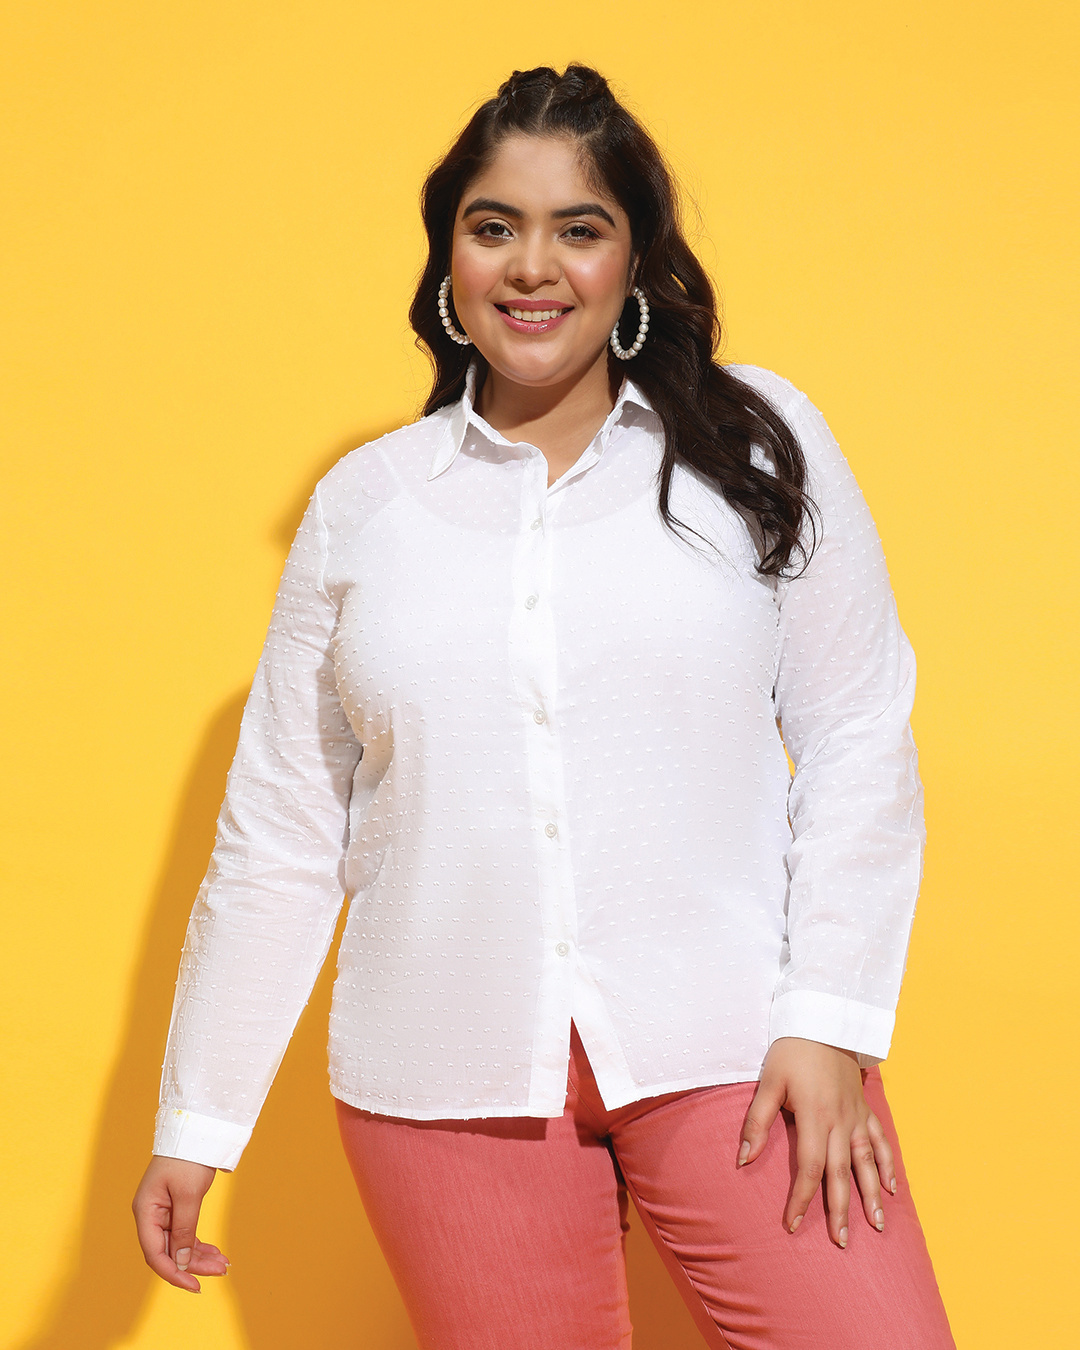 Women's White Textured Plus Size Shirt paired with denim skirt